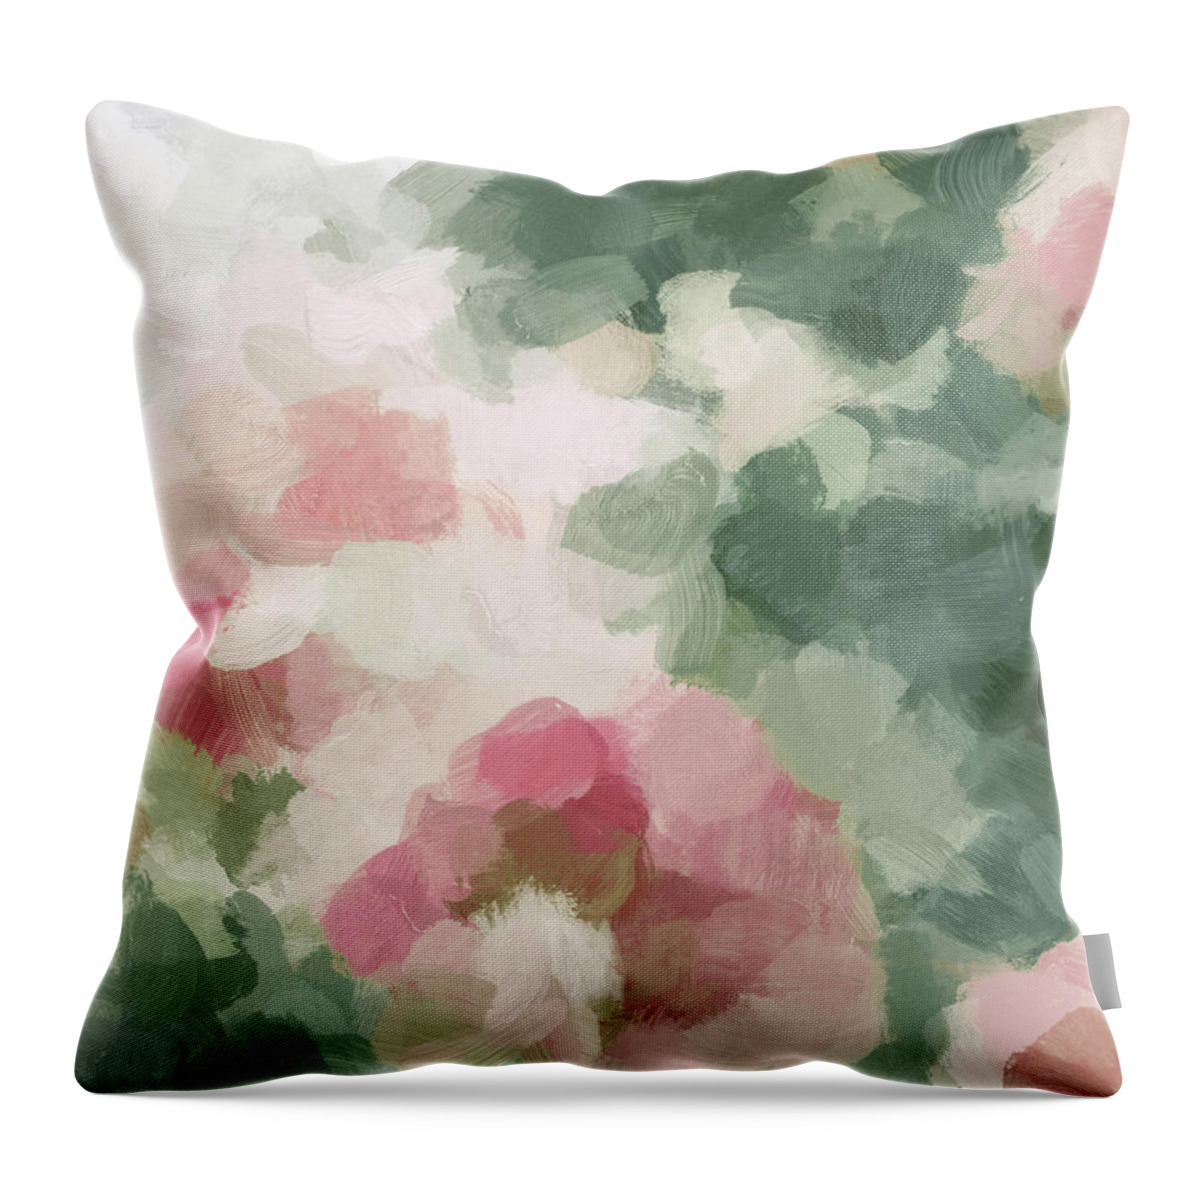 Abstract Throw Pillow featuring the painting Rose Garden by Rachel Elise